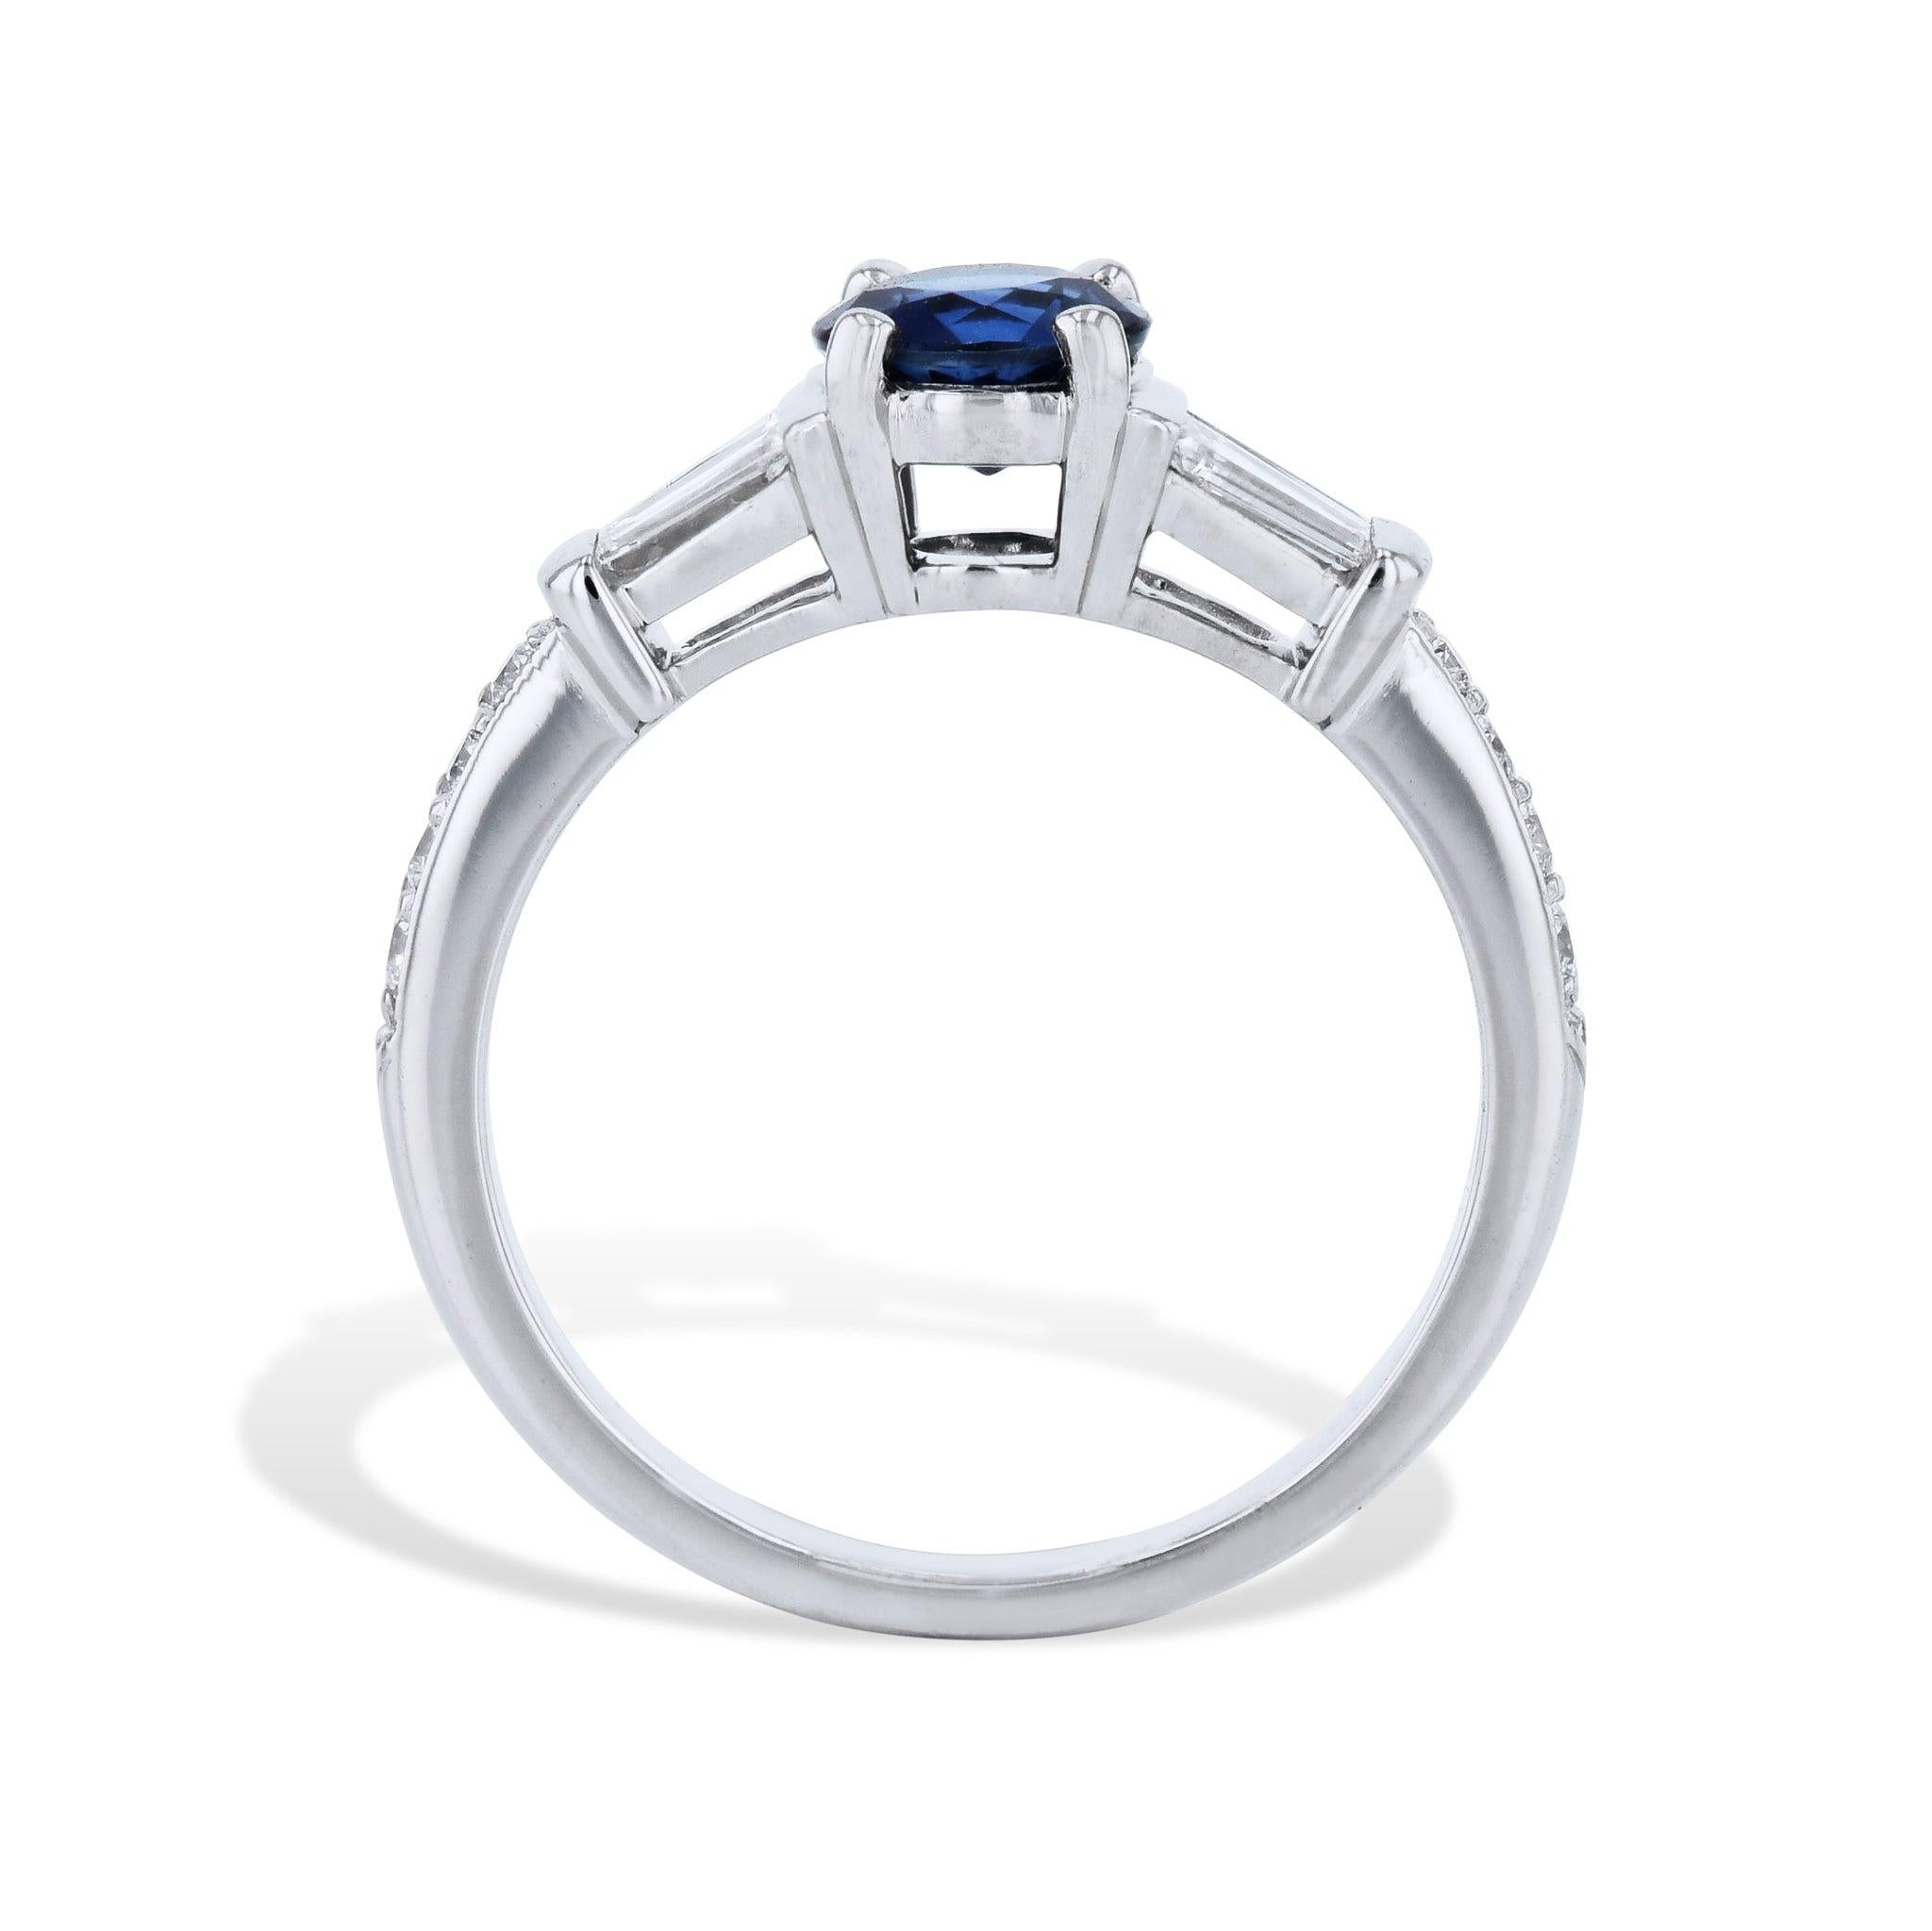 Luxuriate in the beauty of this Round Blue Sapphire Diamond Platinum Estate Ring! Its impressive Sapphire commands attention, while Baguette Diamonds gleam on each side. Pave Diamonds sparkle down the shank. Unforgettable style awaits with this